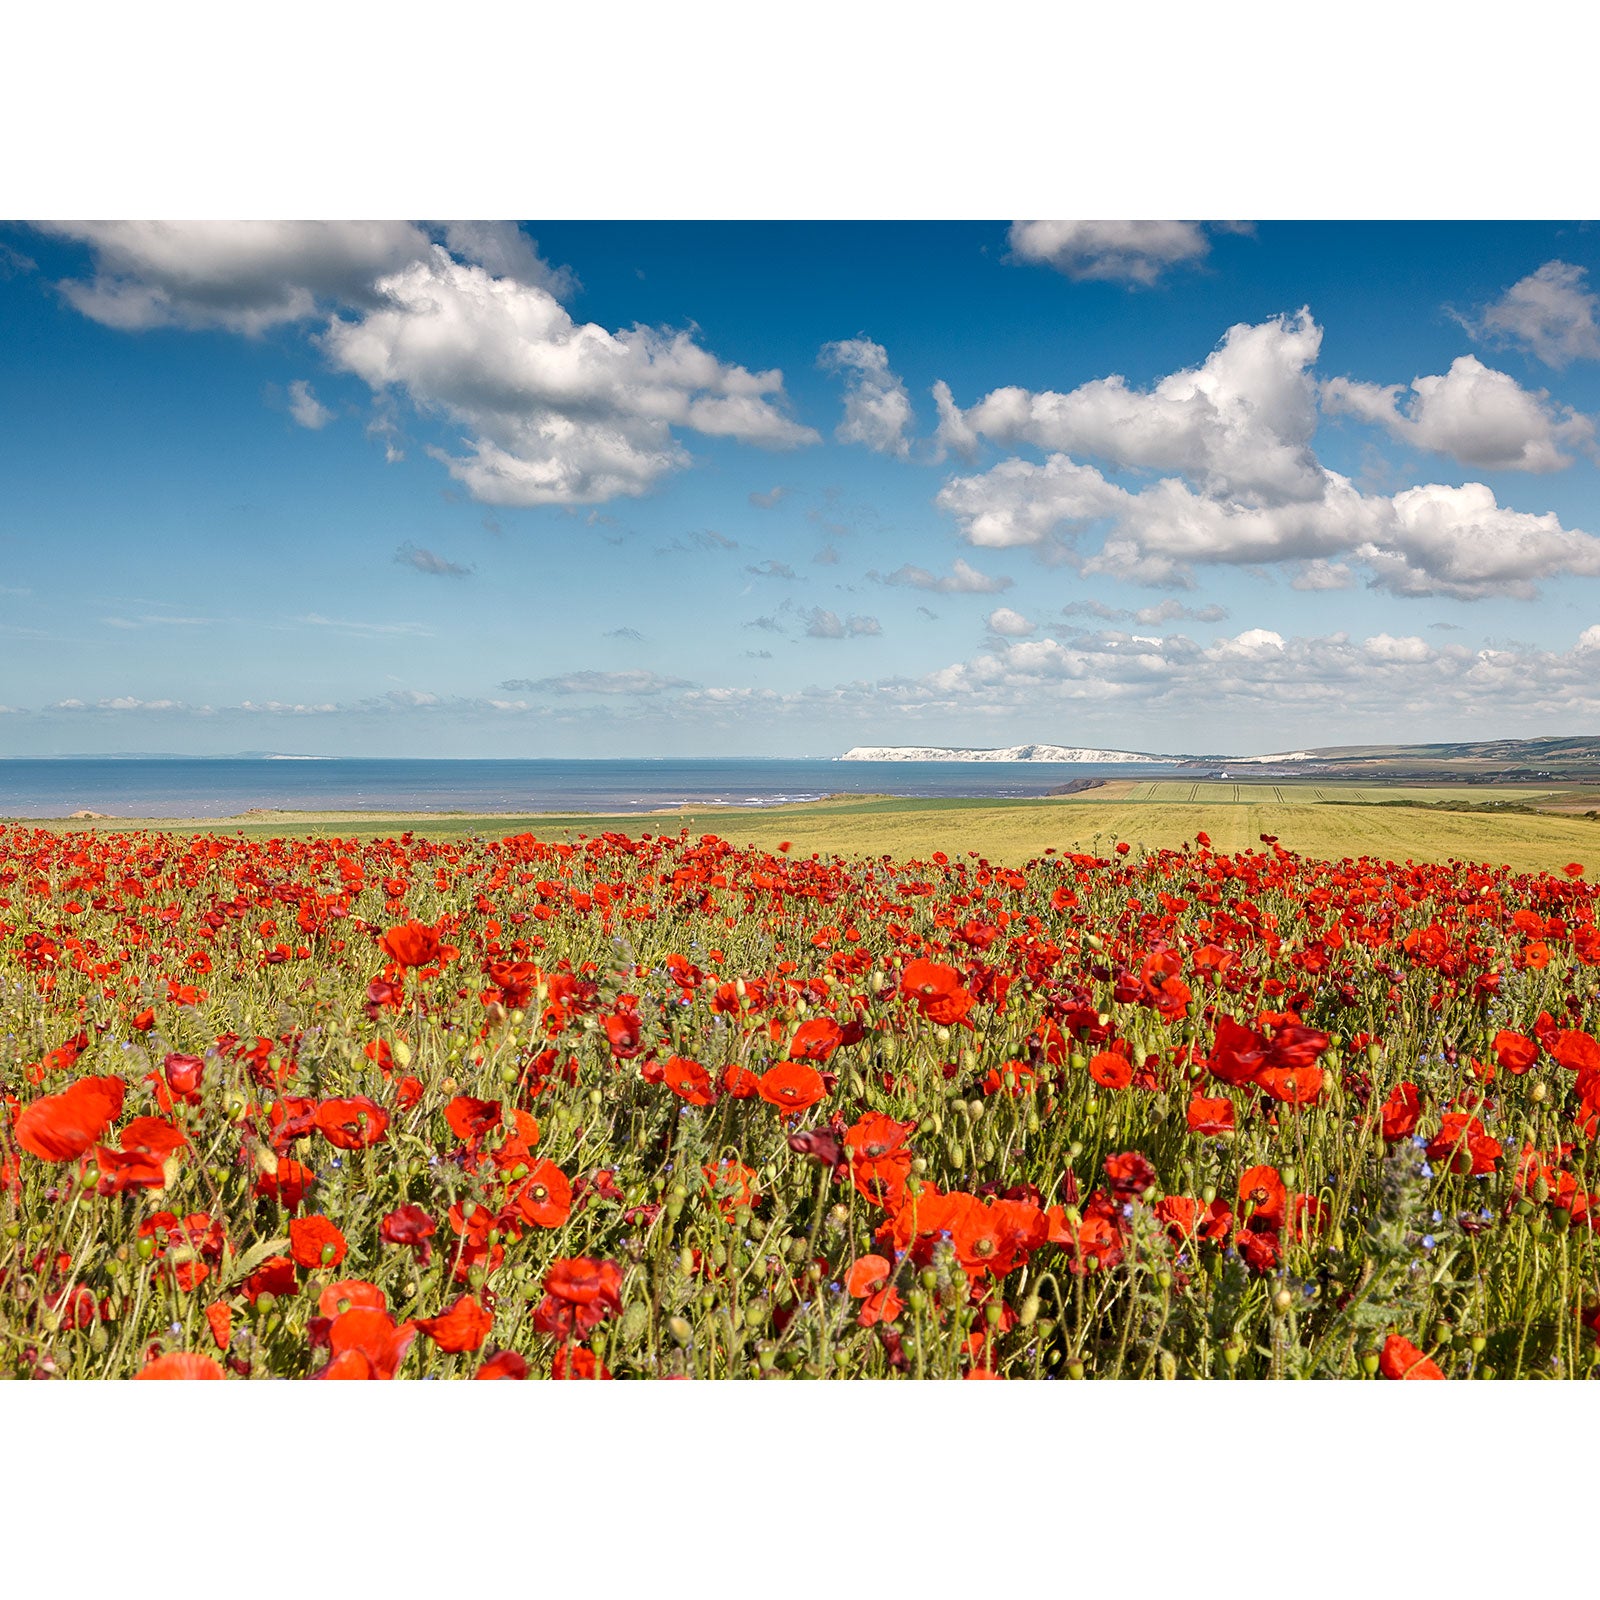 A vibrant field of red poppies with a view of the sea and cliffs on the Isle in the distance under a blue sky with scattered clouds captured by Available Light Photography's Poppies, Chale.